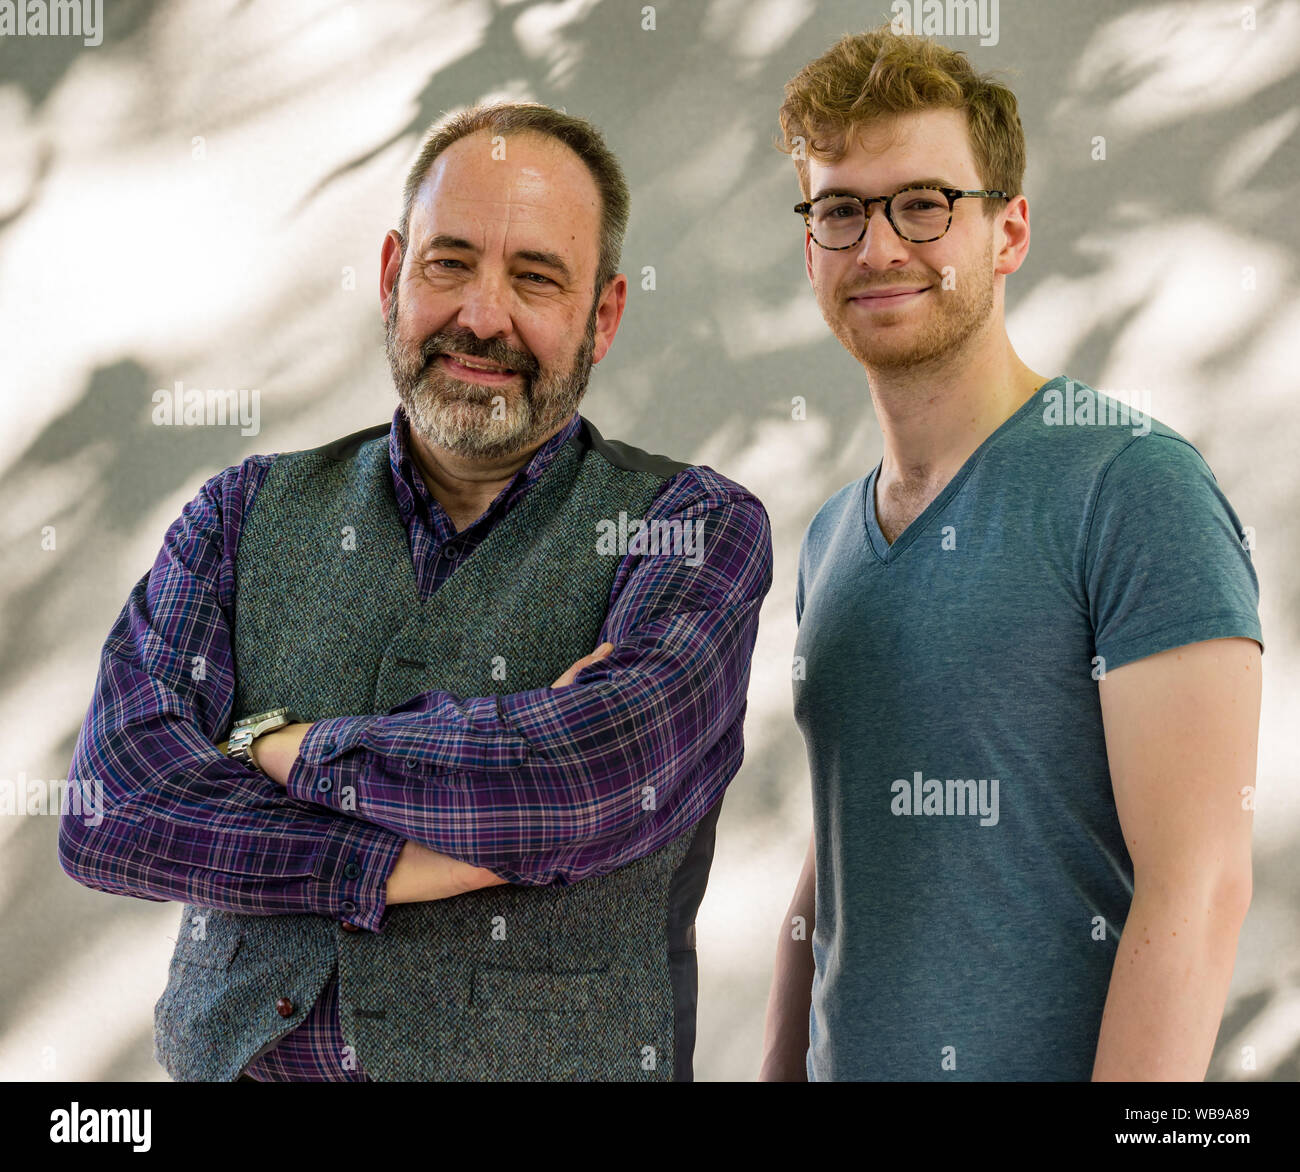 Edinburgh, Scotland, UK, 25 August 2019. Edinburgh International Book Festival. Pictured: James & Tom Morton are father and son. Tom is a Scottish writer, broadcaster, journalist and musician. James is a Scottish doctor, celebrity baker, author Stock Photo